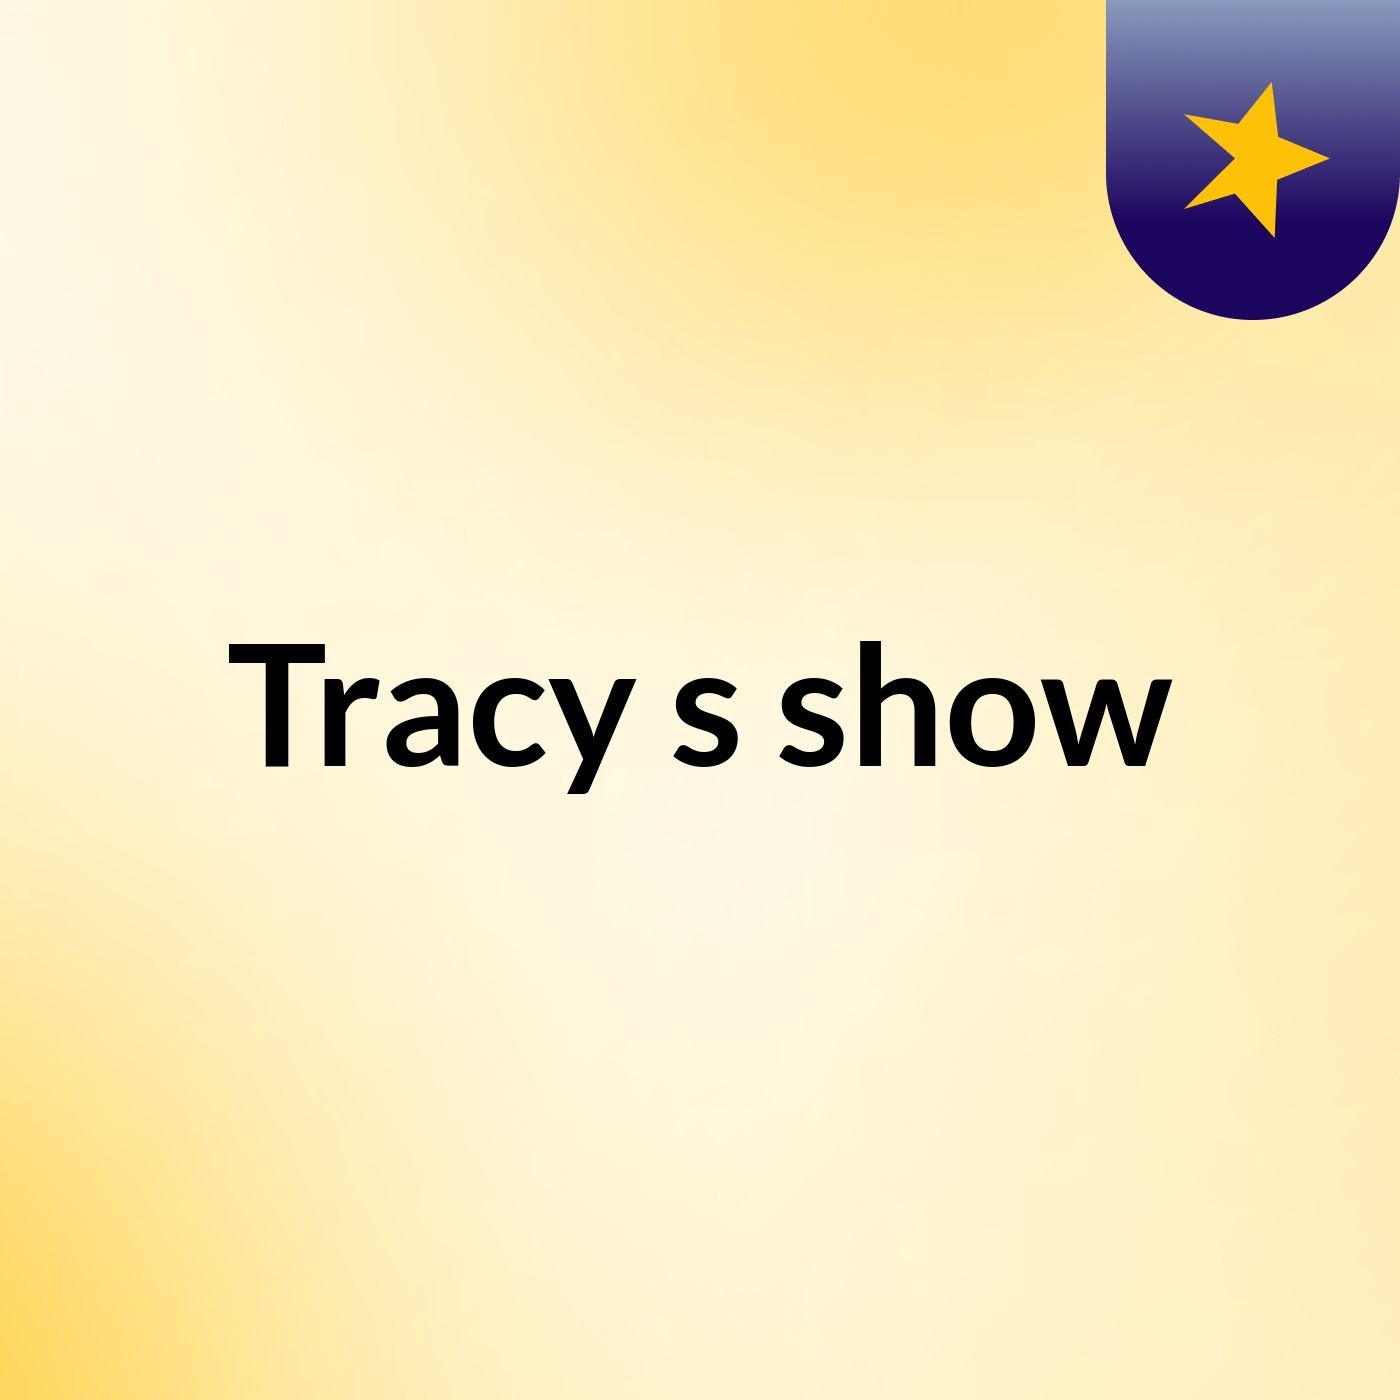 Tracy's show